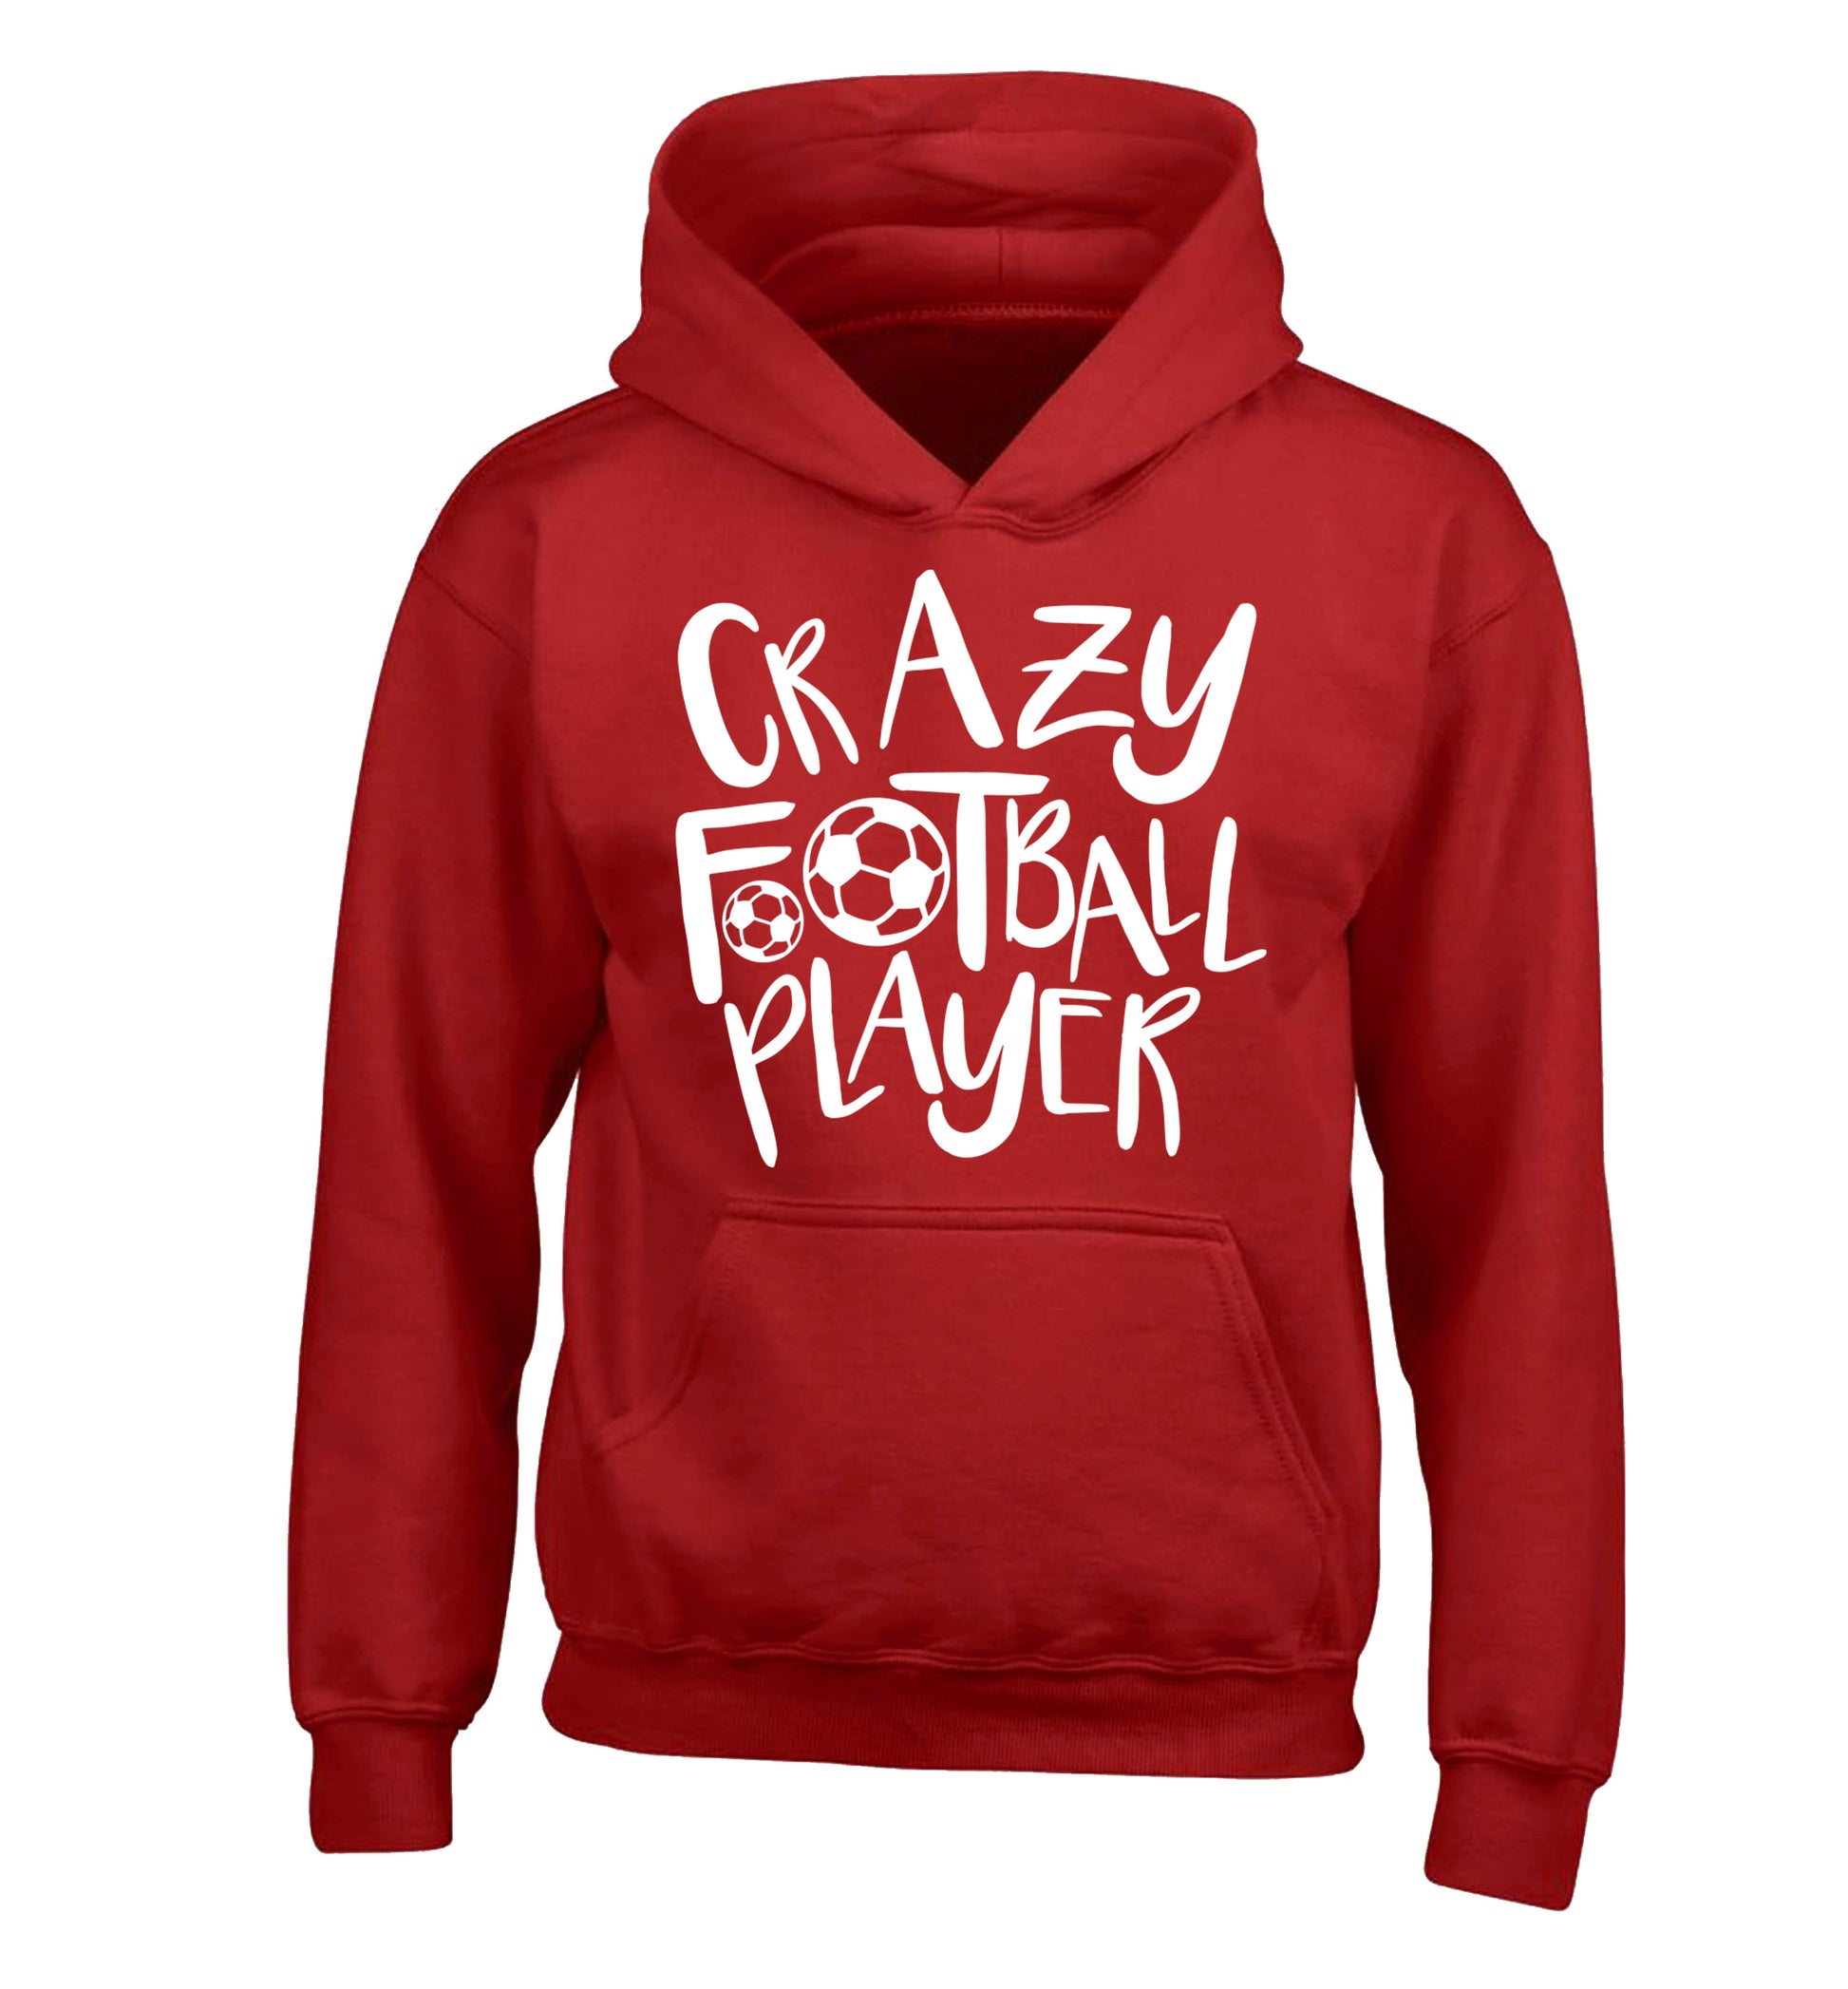 Crazy football player children's red hoodie 12-14 Years